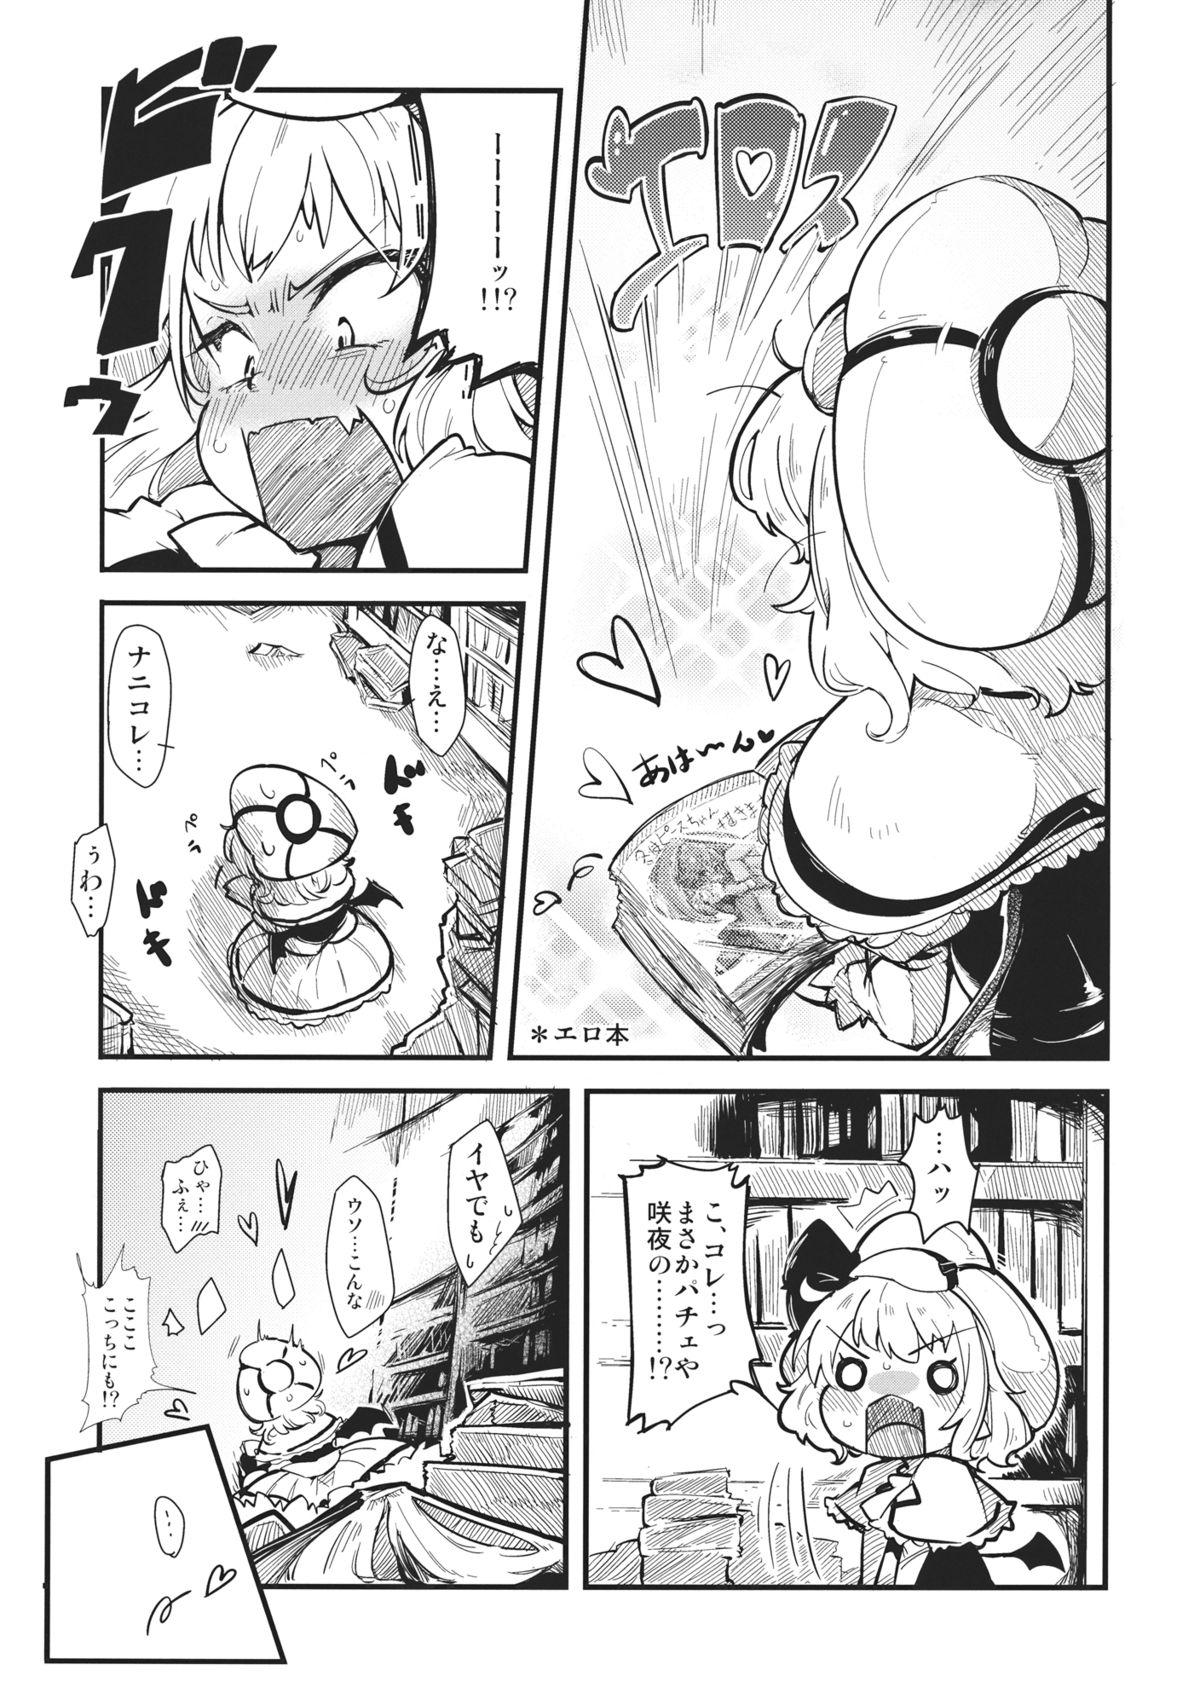 Closeups LolitaEmpress - Touhou project Belly - Page 4